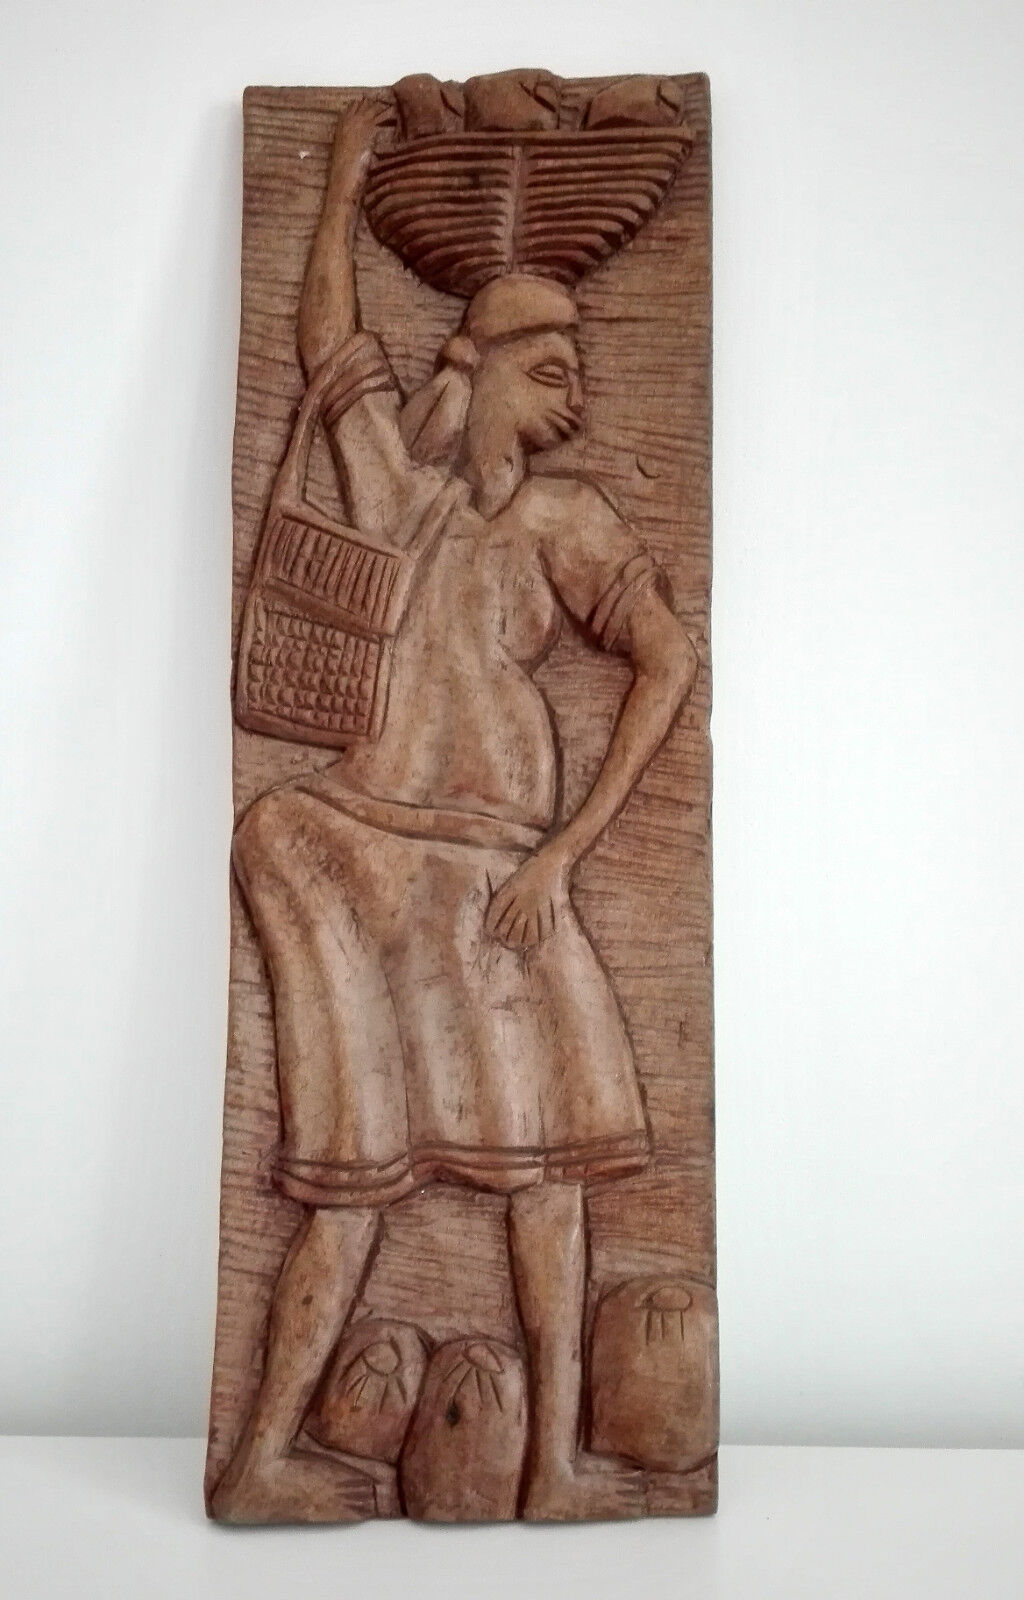 Vintage 1980s Egyptian themed wood sculpture wooden wall hanging panel handmade 